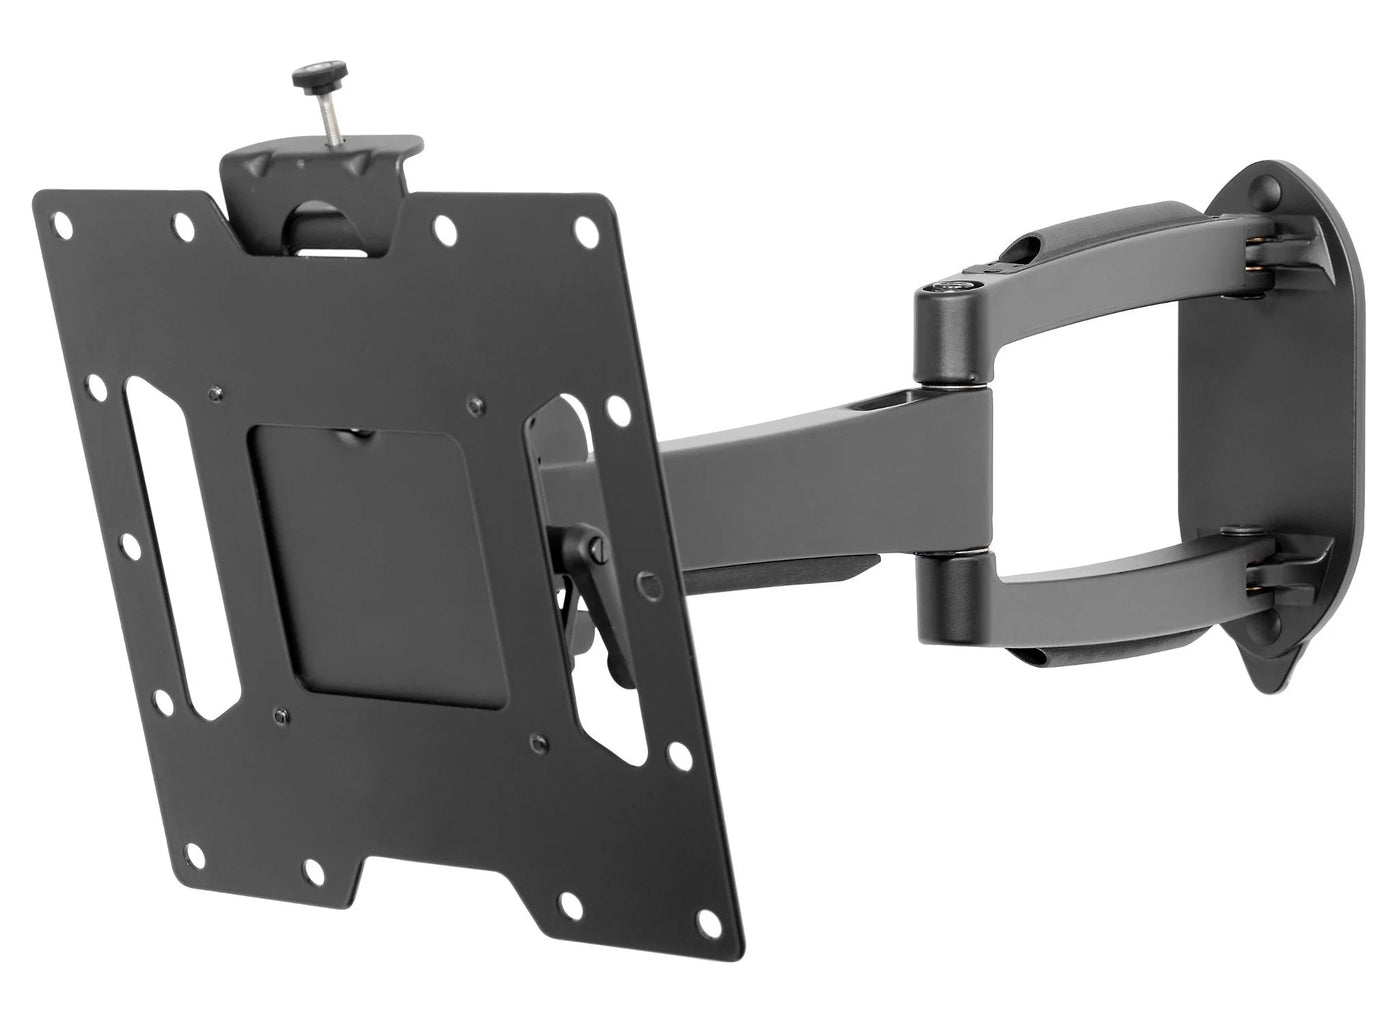 Peerless SA740P SmartMount Articulating Wall Mount for 22" to 43" Displays